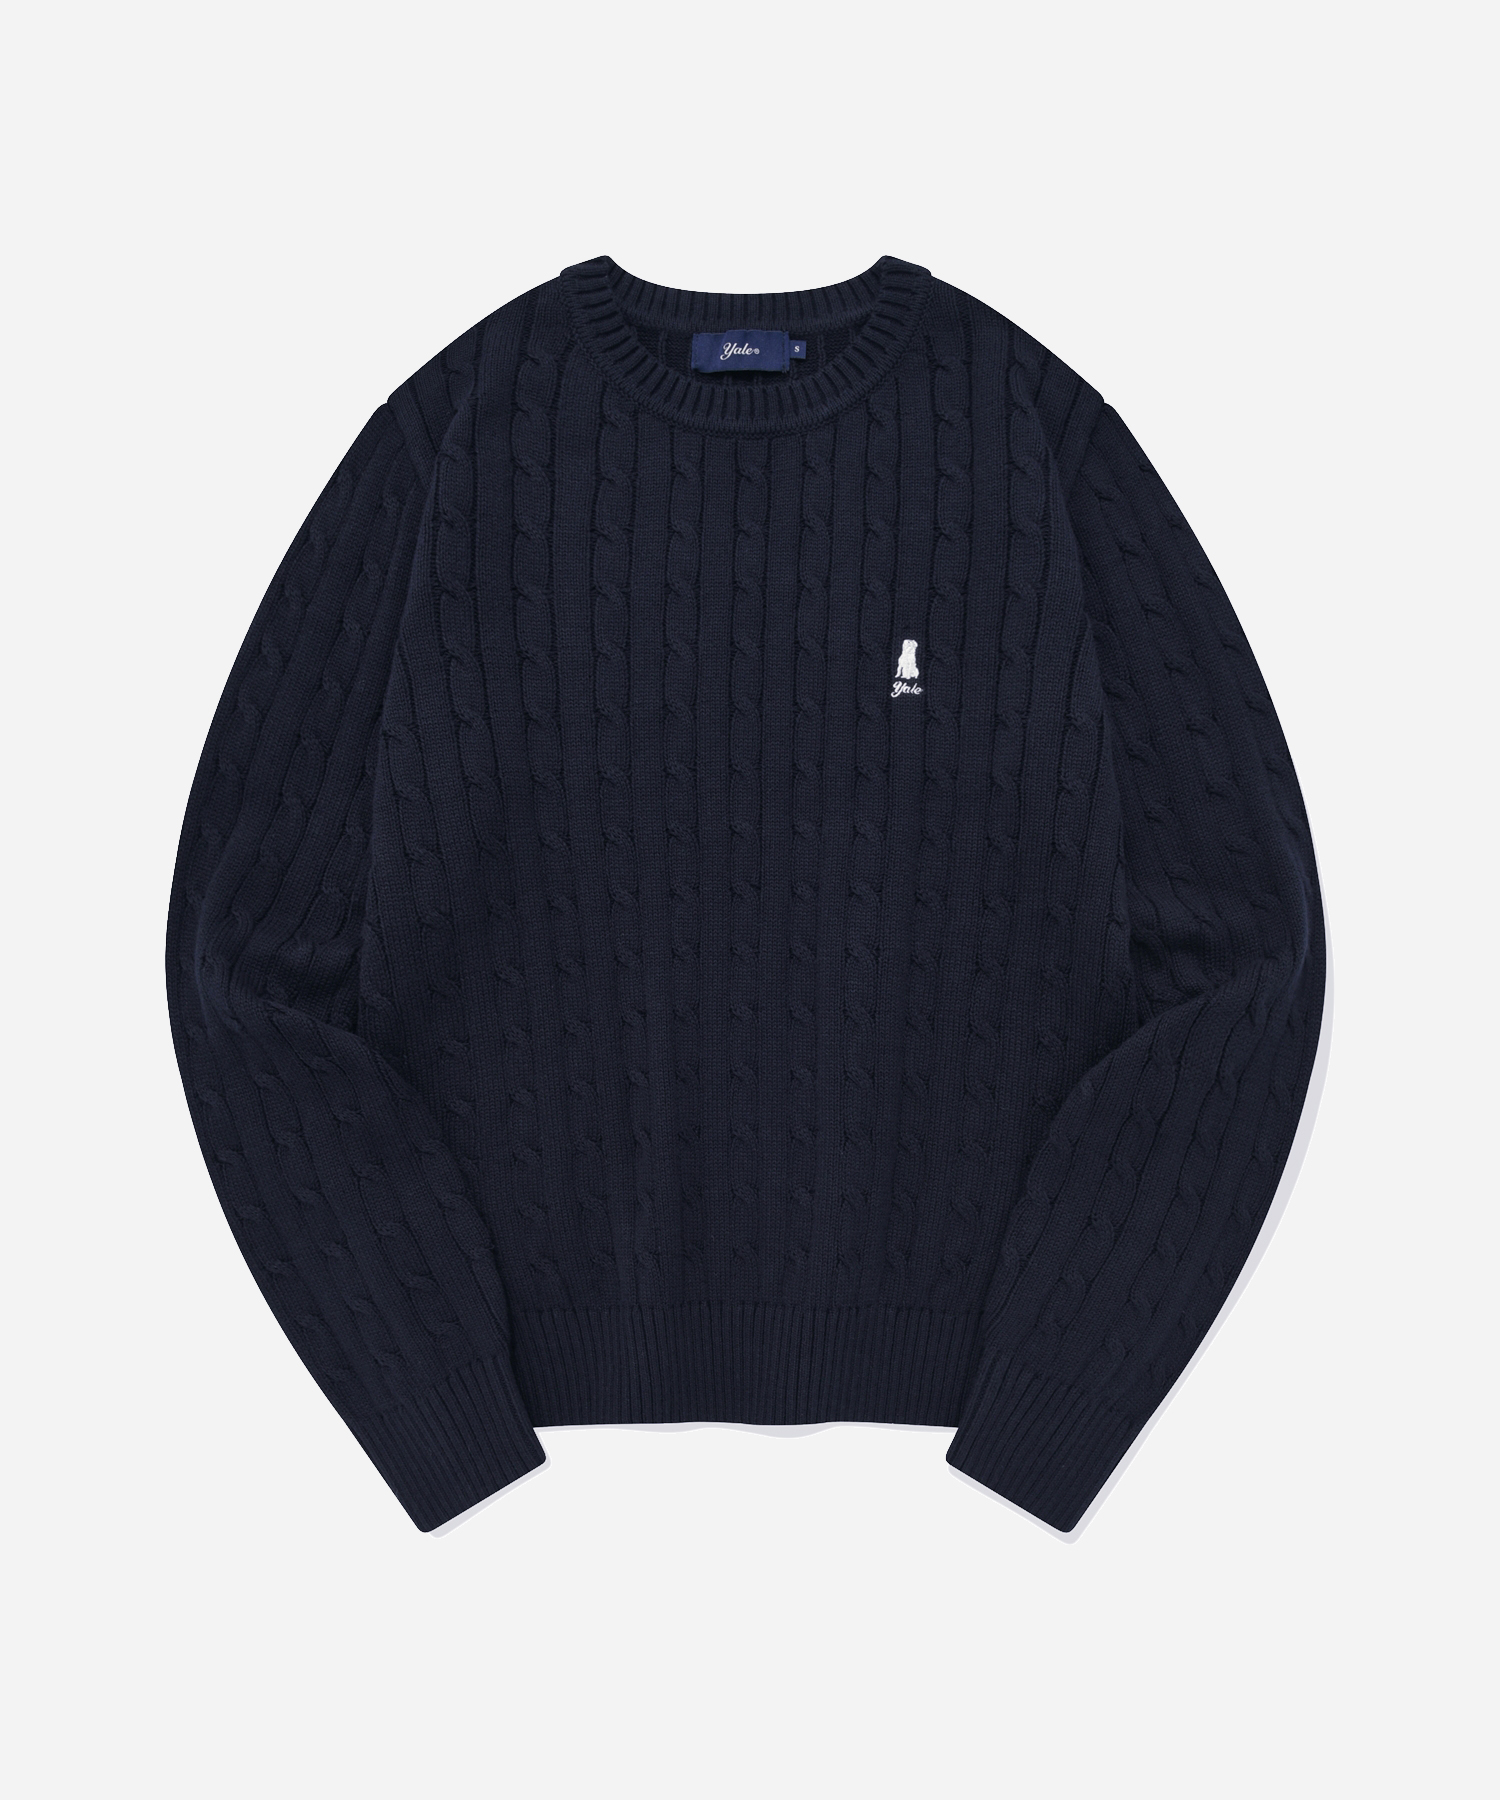 [100% COTTON] WOMENS HERITAGE DAN CABLE KNIT NAVY